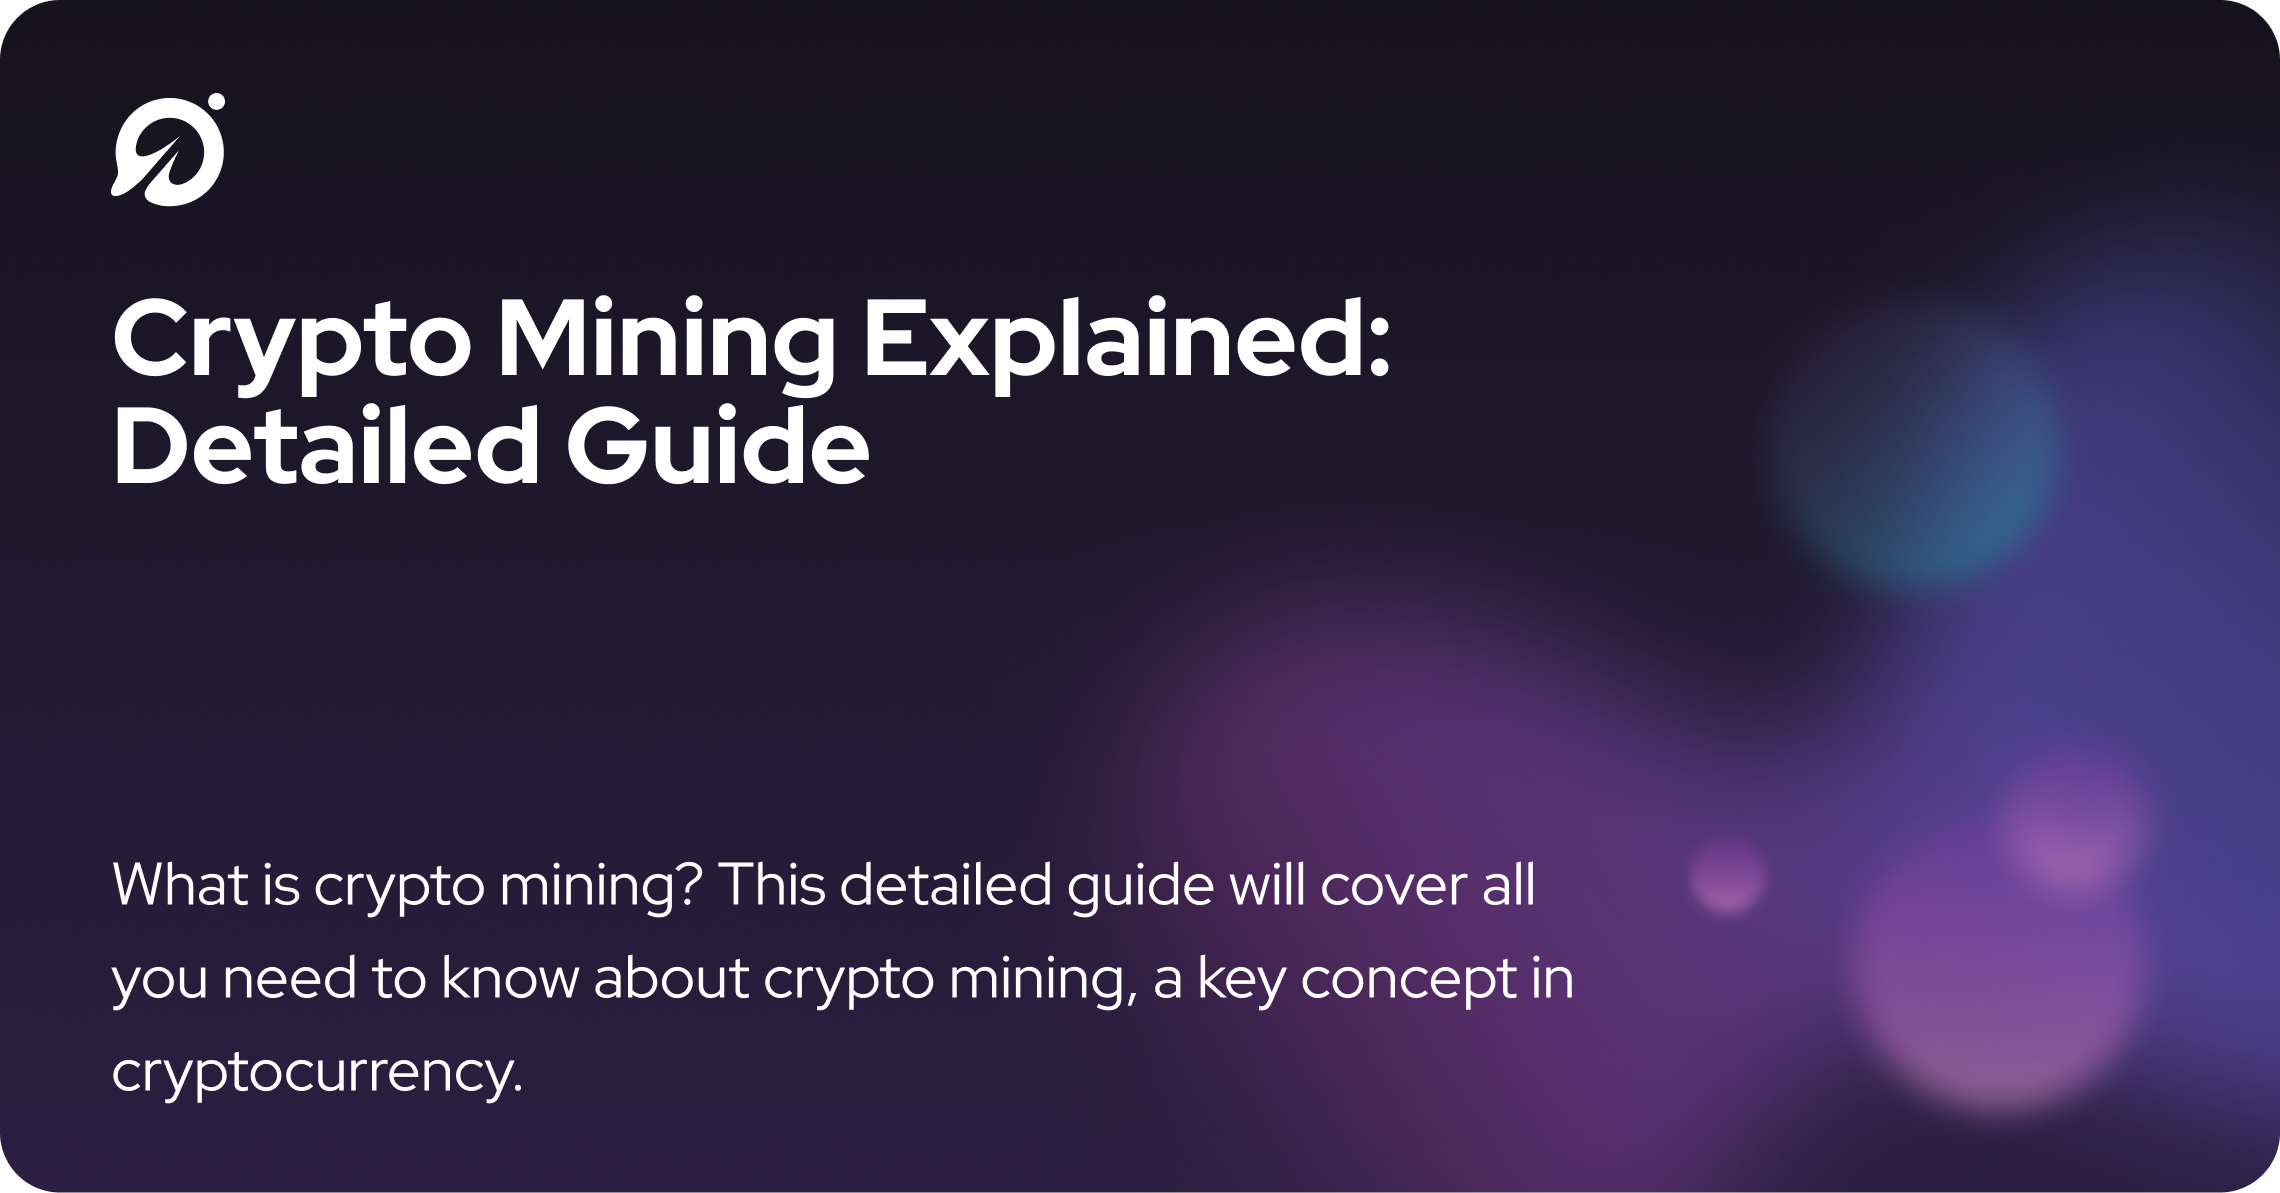 Crypto Mining Explained: Detailed Guide